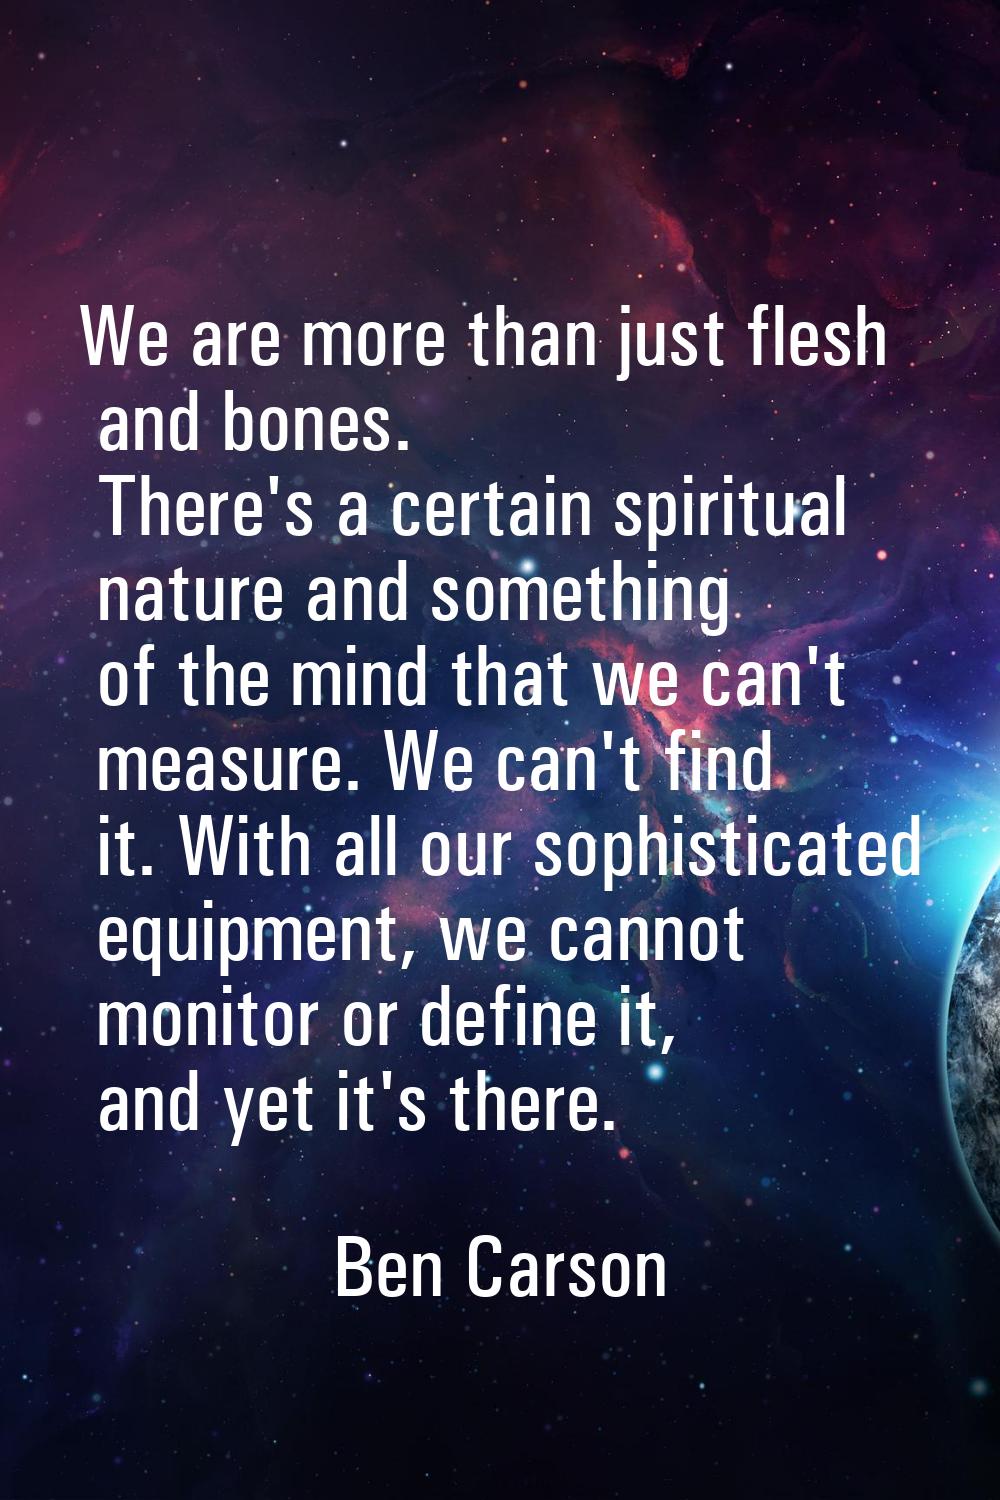 We are more than just flesh and bones. There's a certain spiritual nature and something of the mind